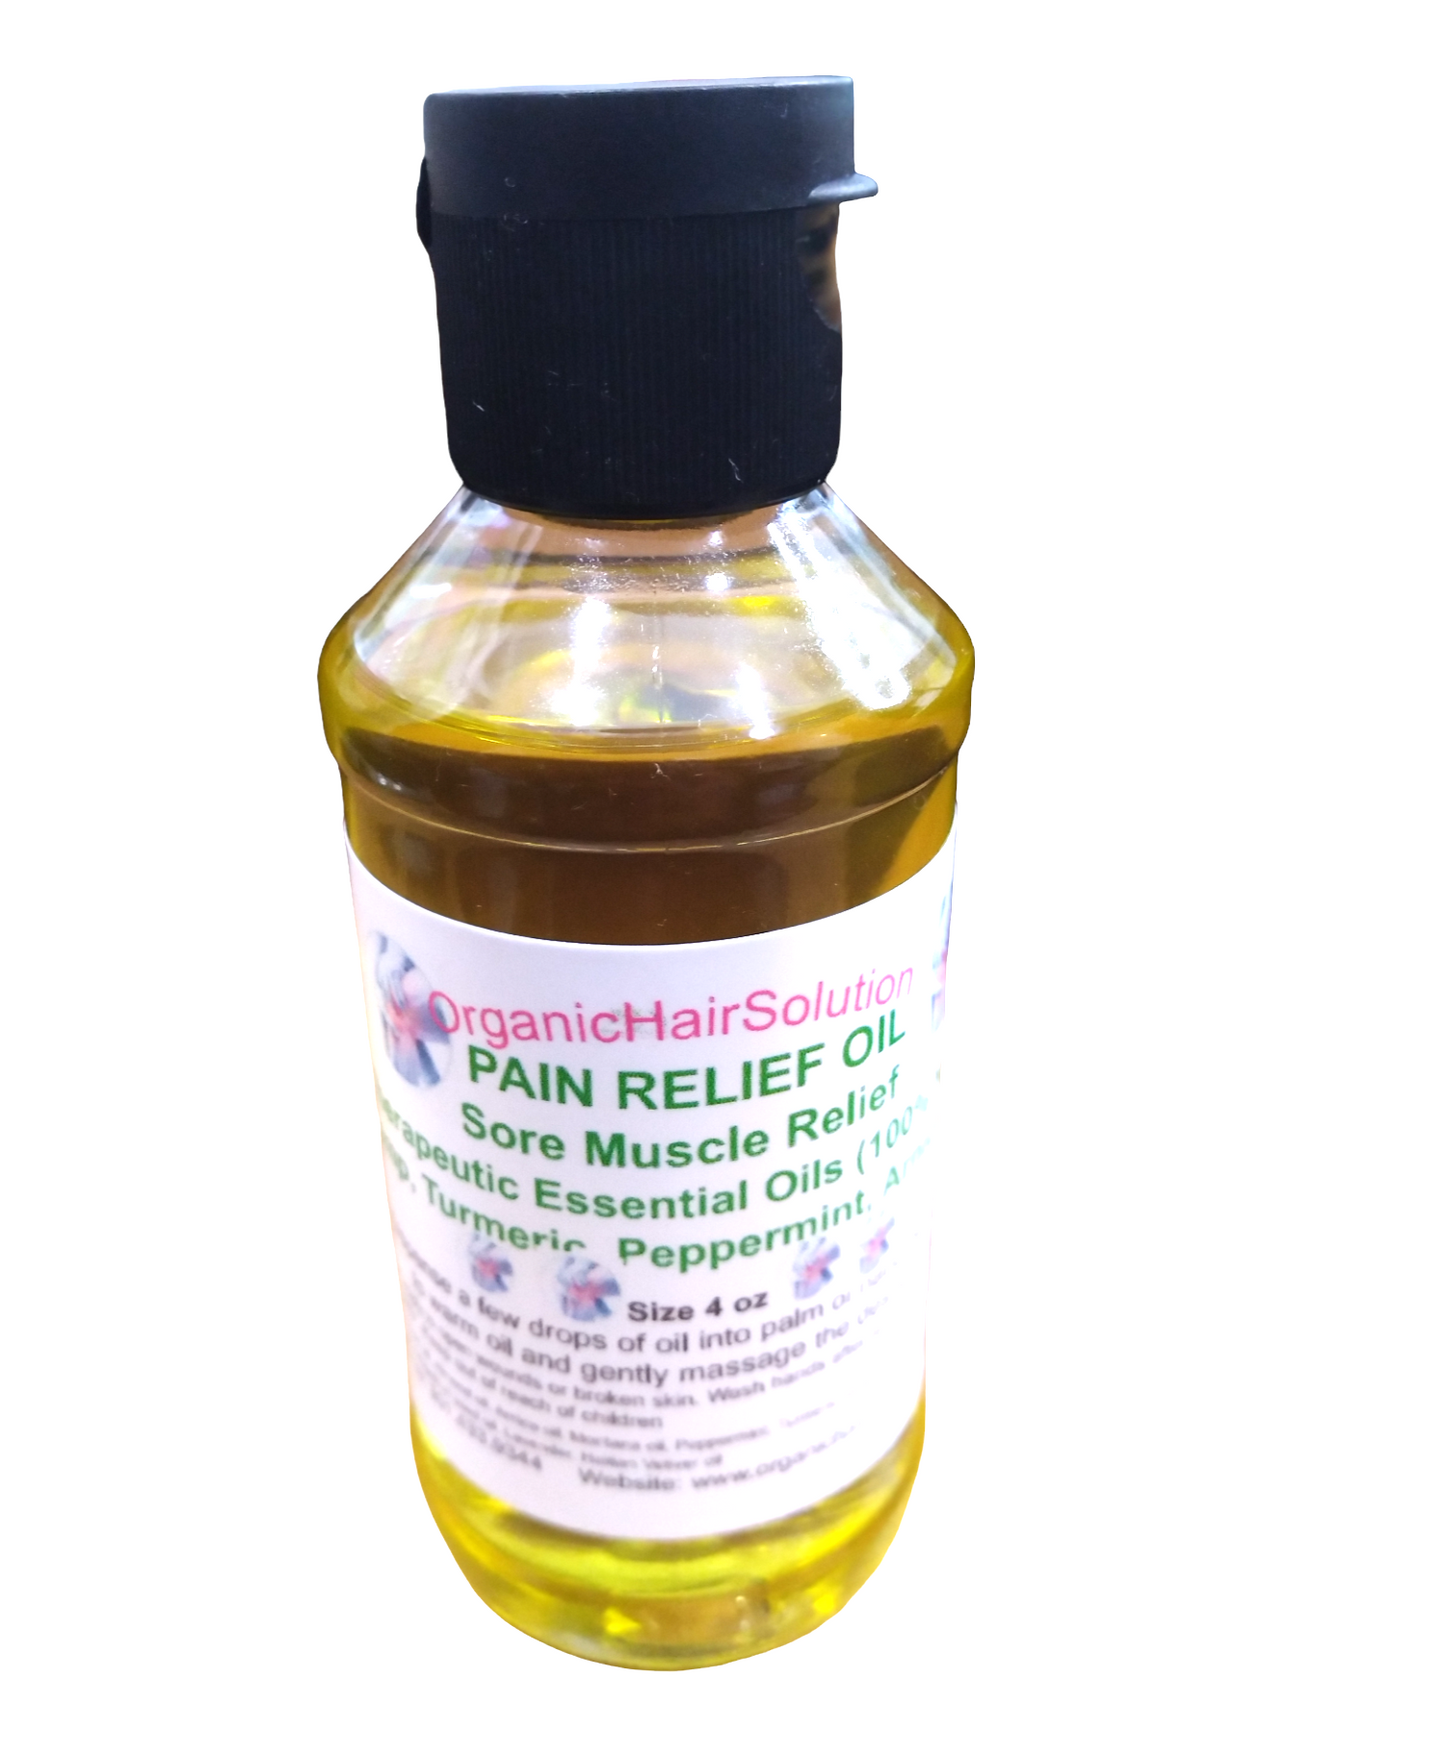 Sore Muscle Massage Oil for Joint & Muscles-Natural Therapy Oil with  Hemp Seed, Arnica Montana Oil & Peppermint - Organic Hair Solution, LLC